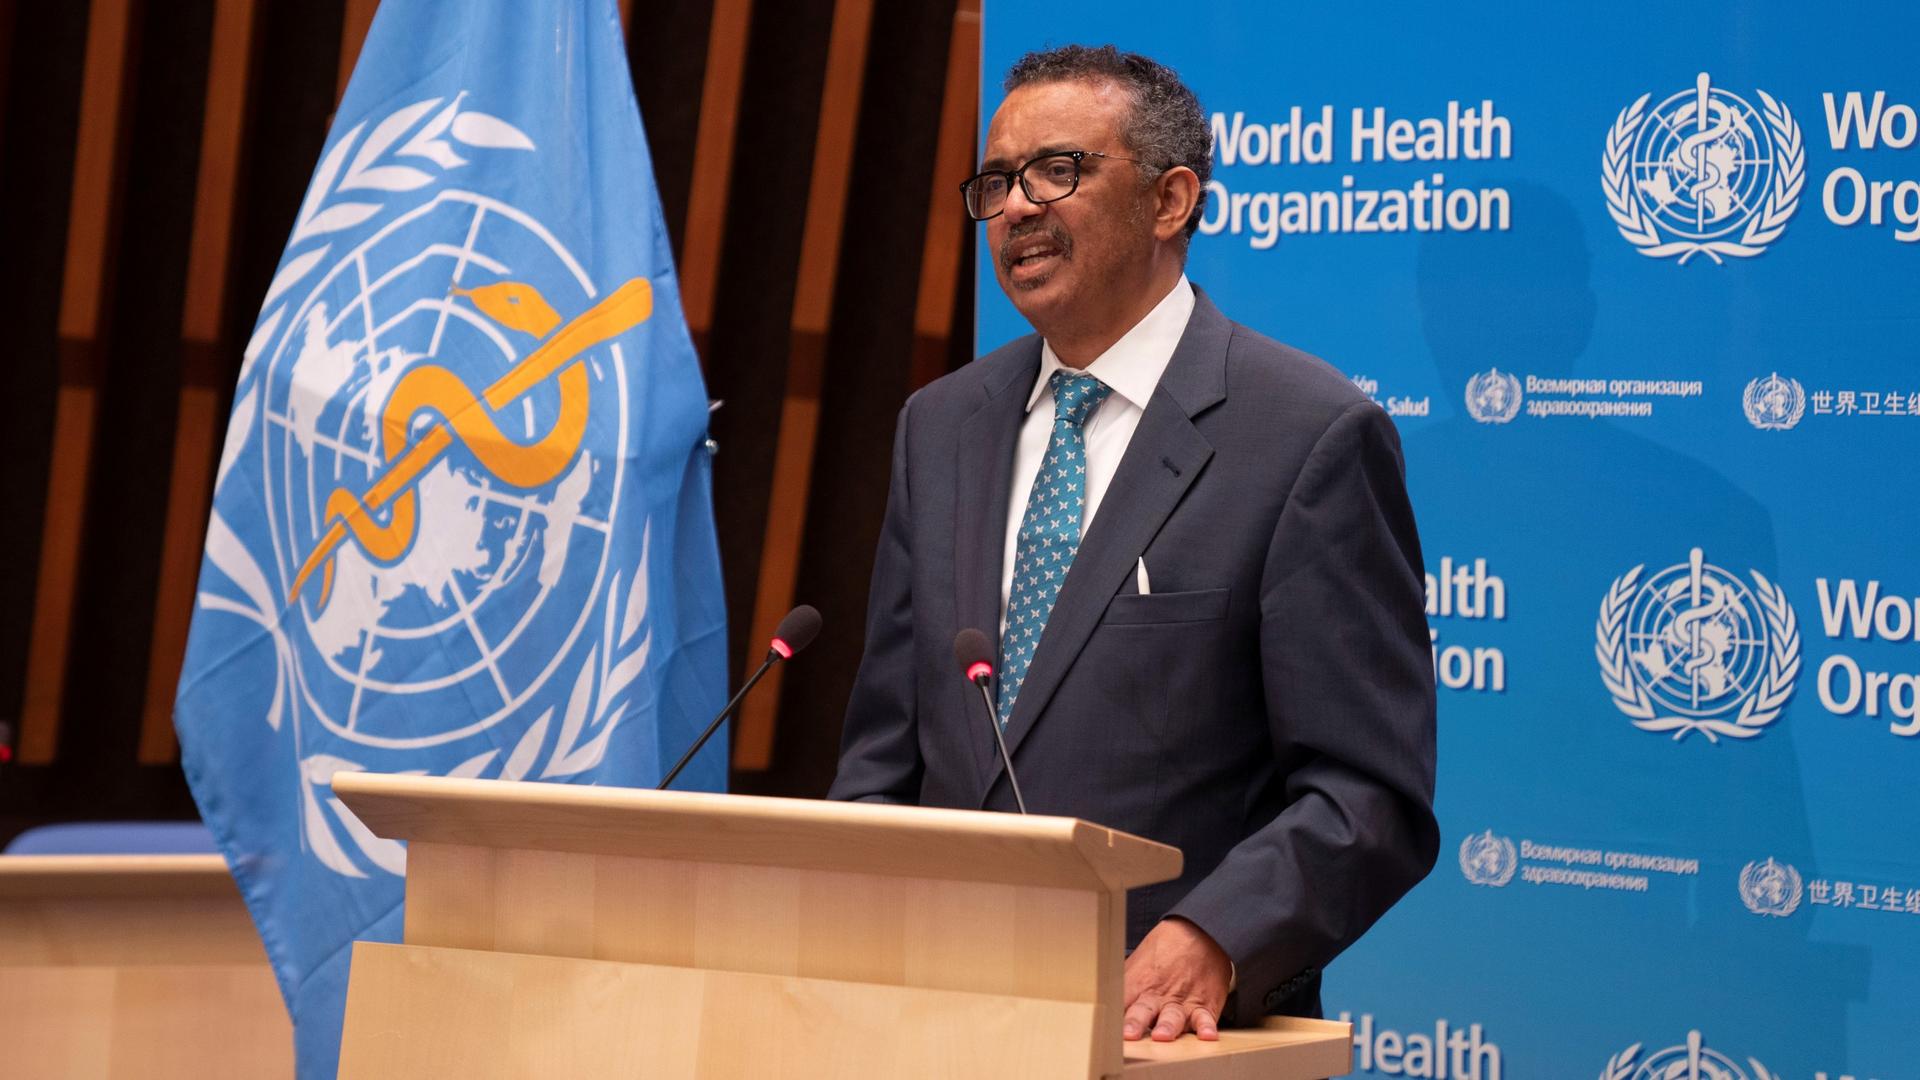 In this file photo, Tedros Adhanom Ghebreyesus, director general of World Health Organization (WHO) speaks at the virtual 73rd World Health Assembly (WHA) to address the coronavirus, in Geneva, Switzerland, May 18, 2020.